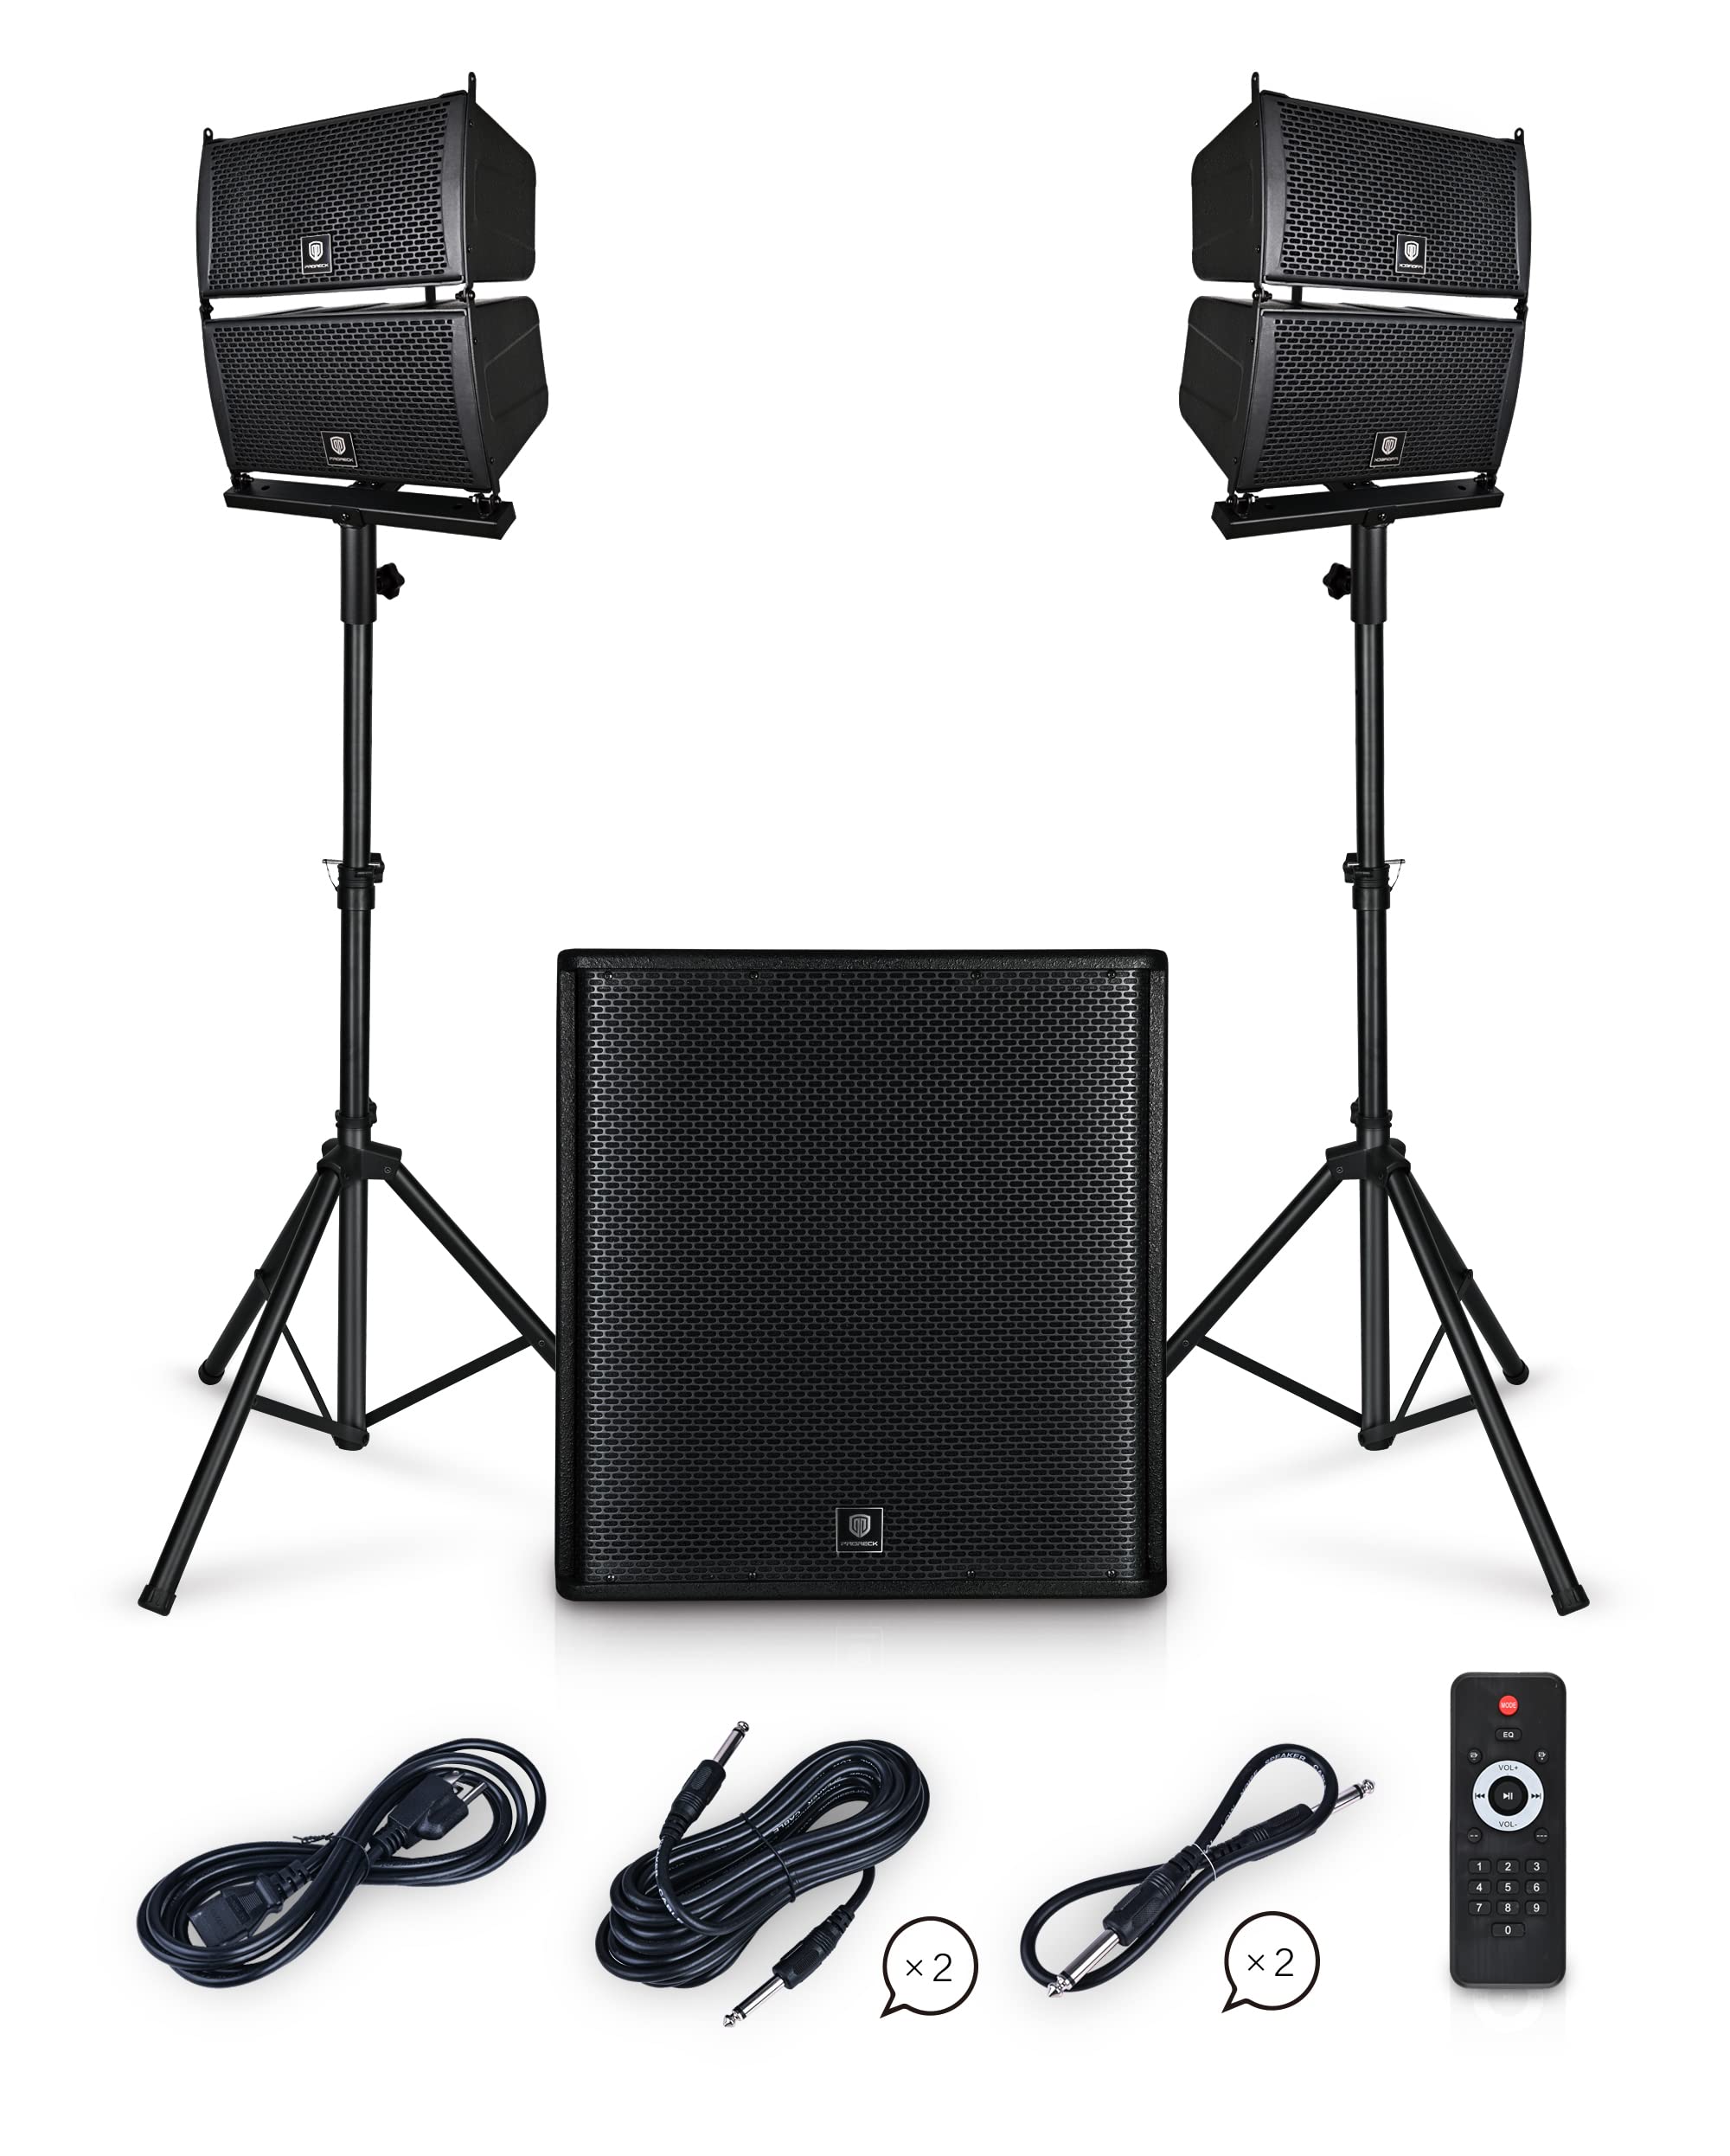 PRORECK Club 4000 18-inch 4000W P.M.P.O Stereo DJ/Powered PA Speaker System Combo Set Line Array Speaker and 18 inch Active Subwoofer with Bluetoot...